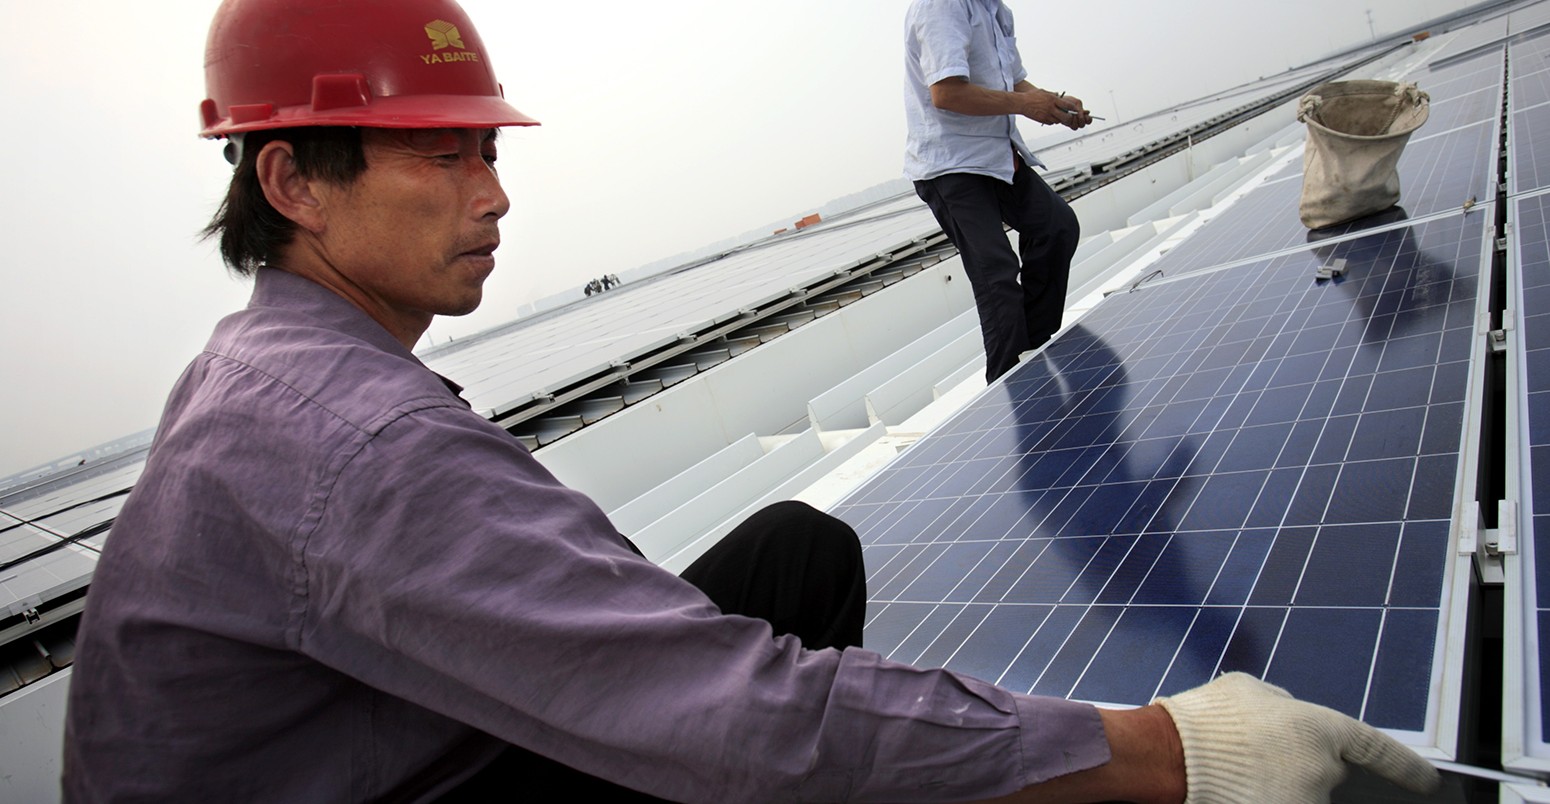 Workers install solar panels on the roofs of the Hongqiao Passenger Rail Terminal in Shanghai, China, 19 May 2010. Credit: Jiri Rezac/The Climate Group.